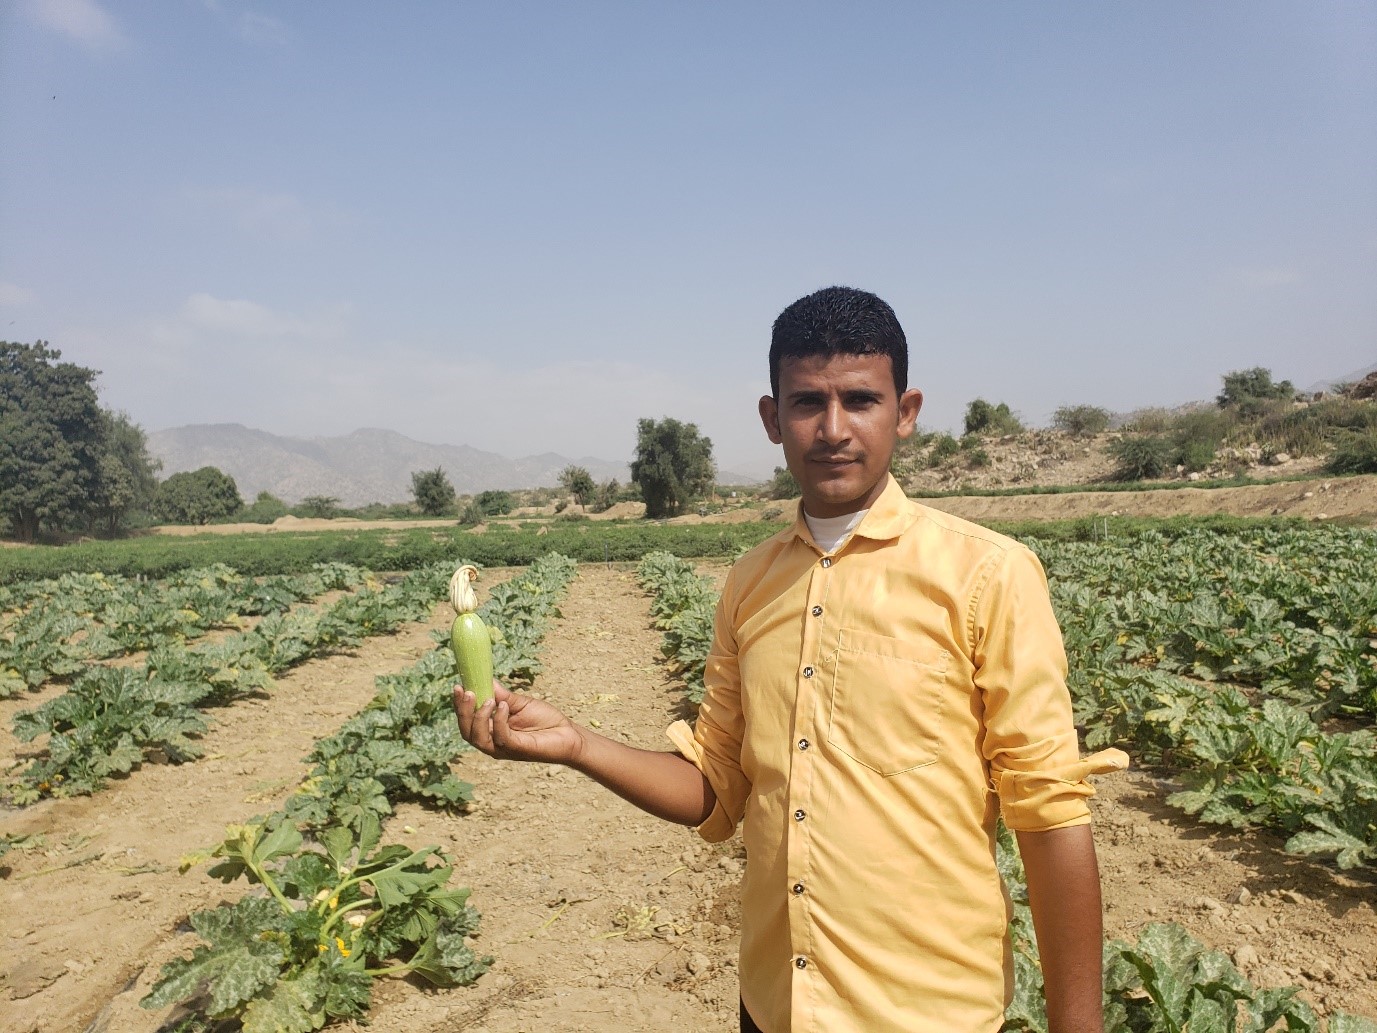 A man holding a vegetable in a field